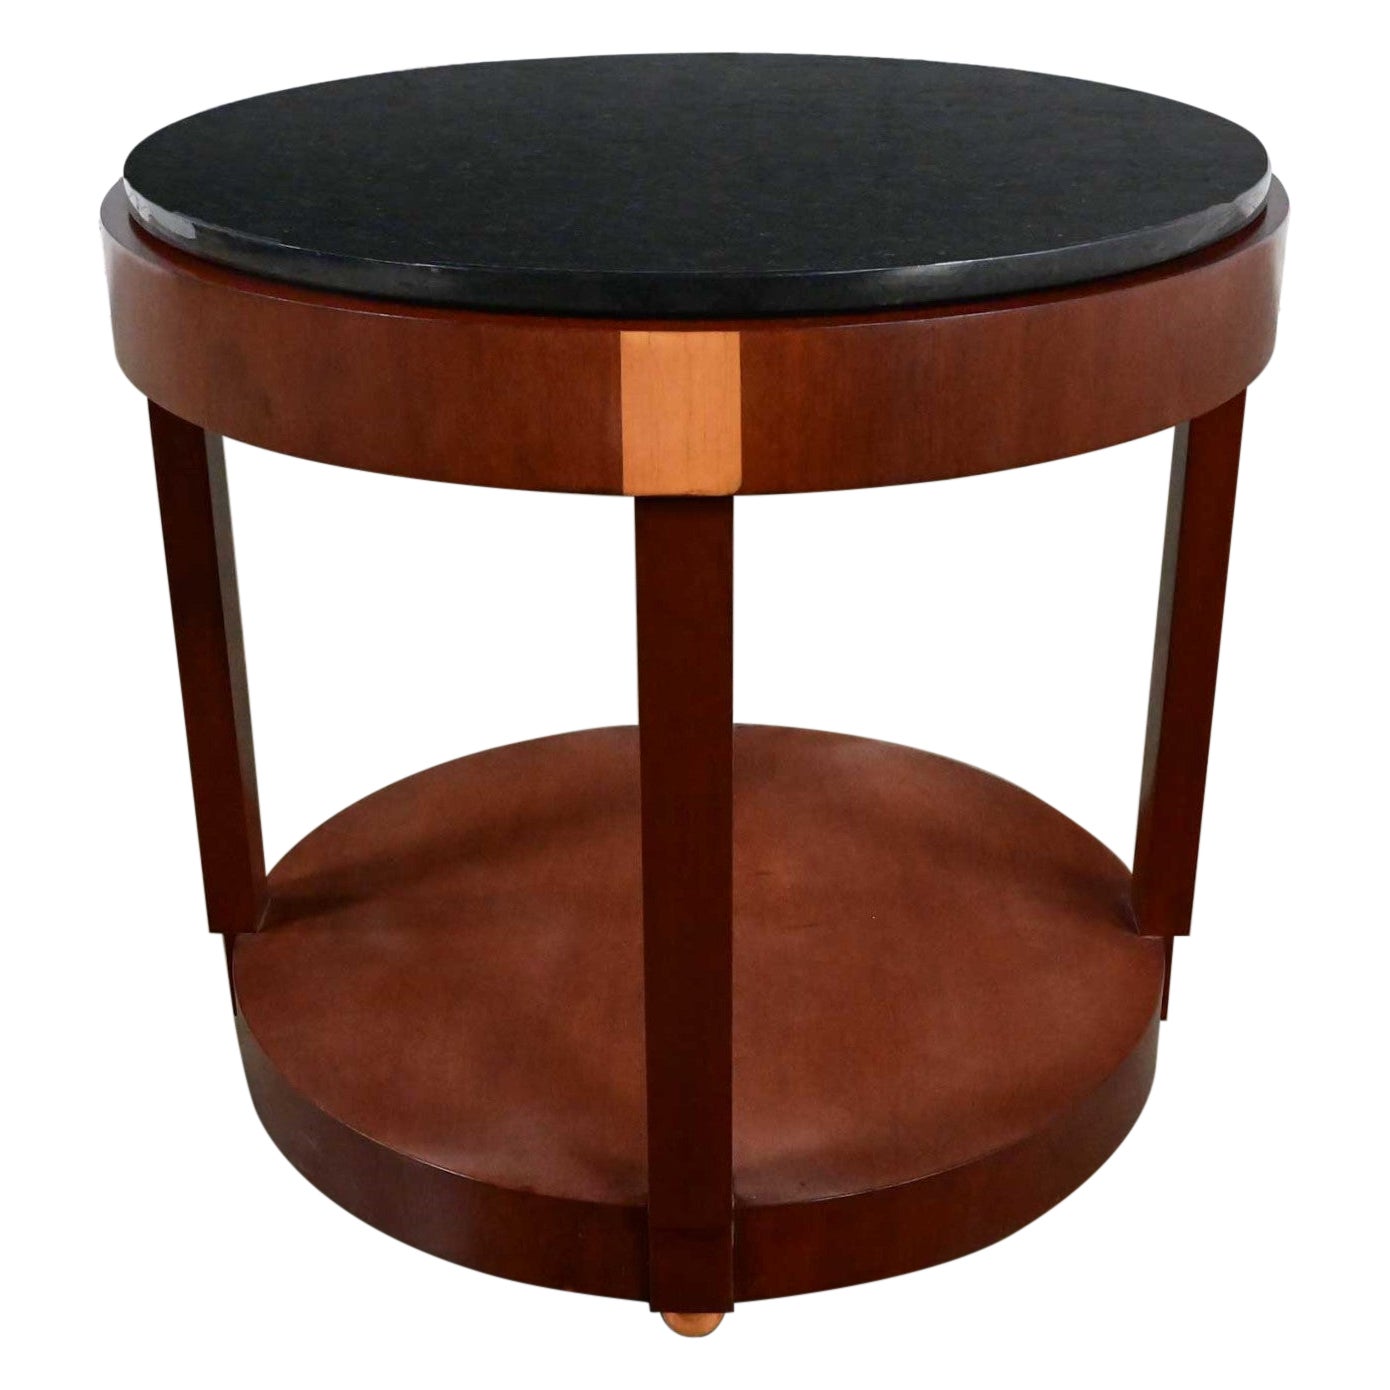 Art Deco Revival Custom Two Toned Mahogany Round Side Table Black Granite Top For Sale